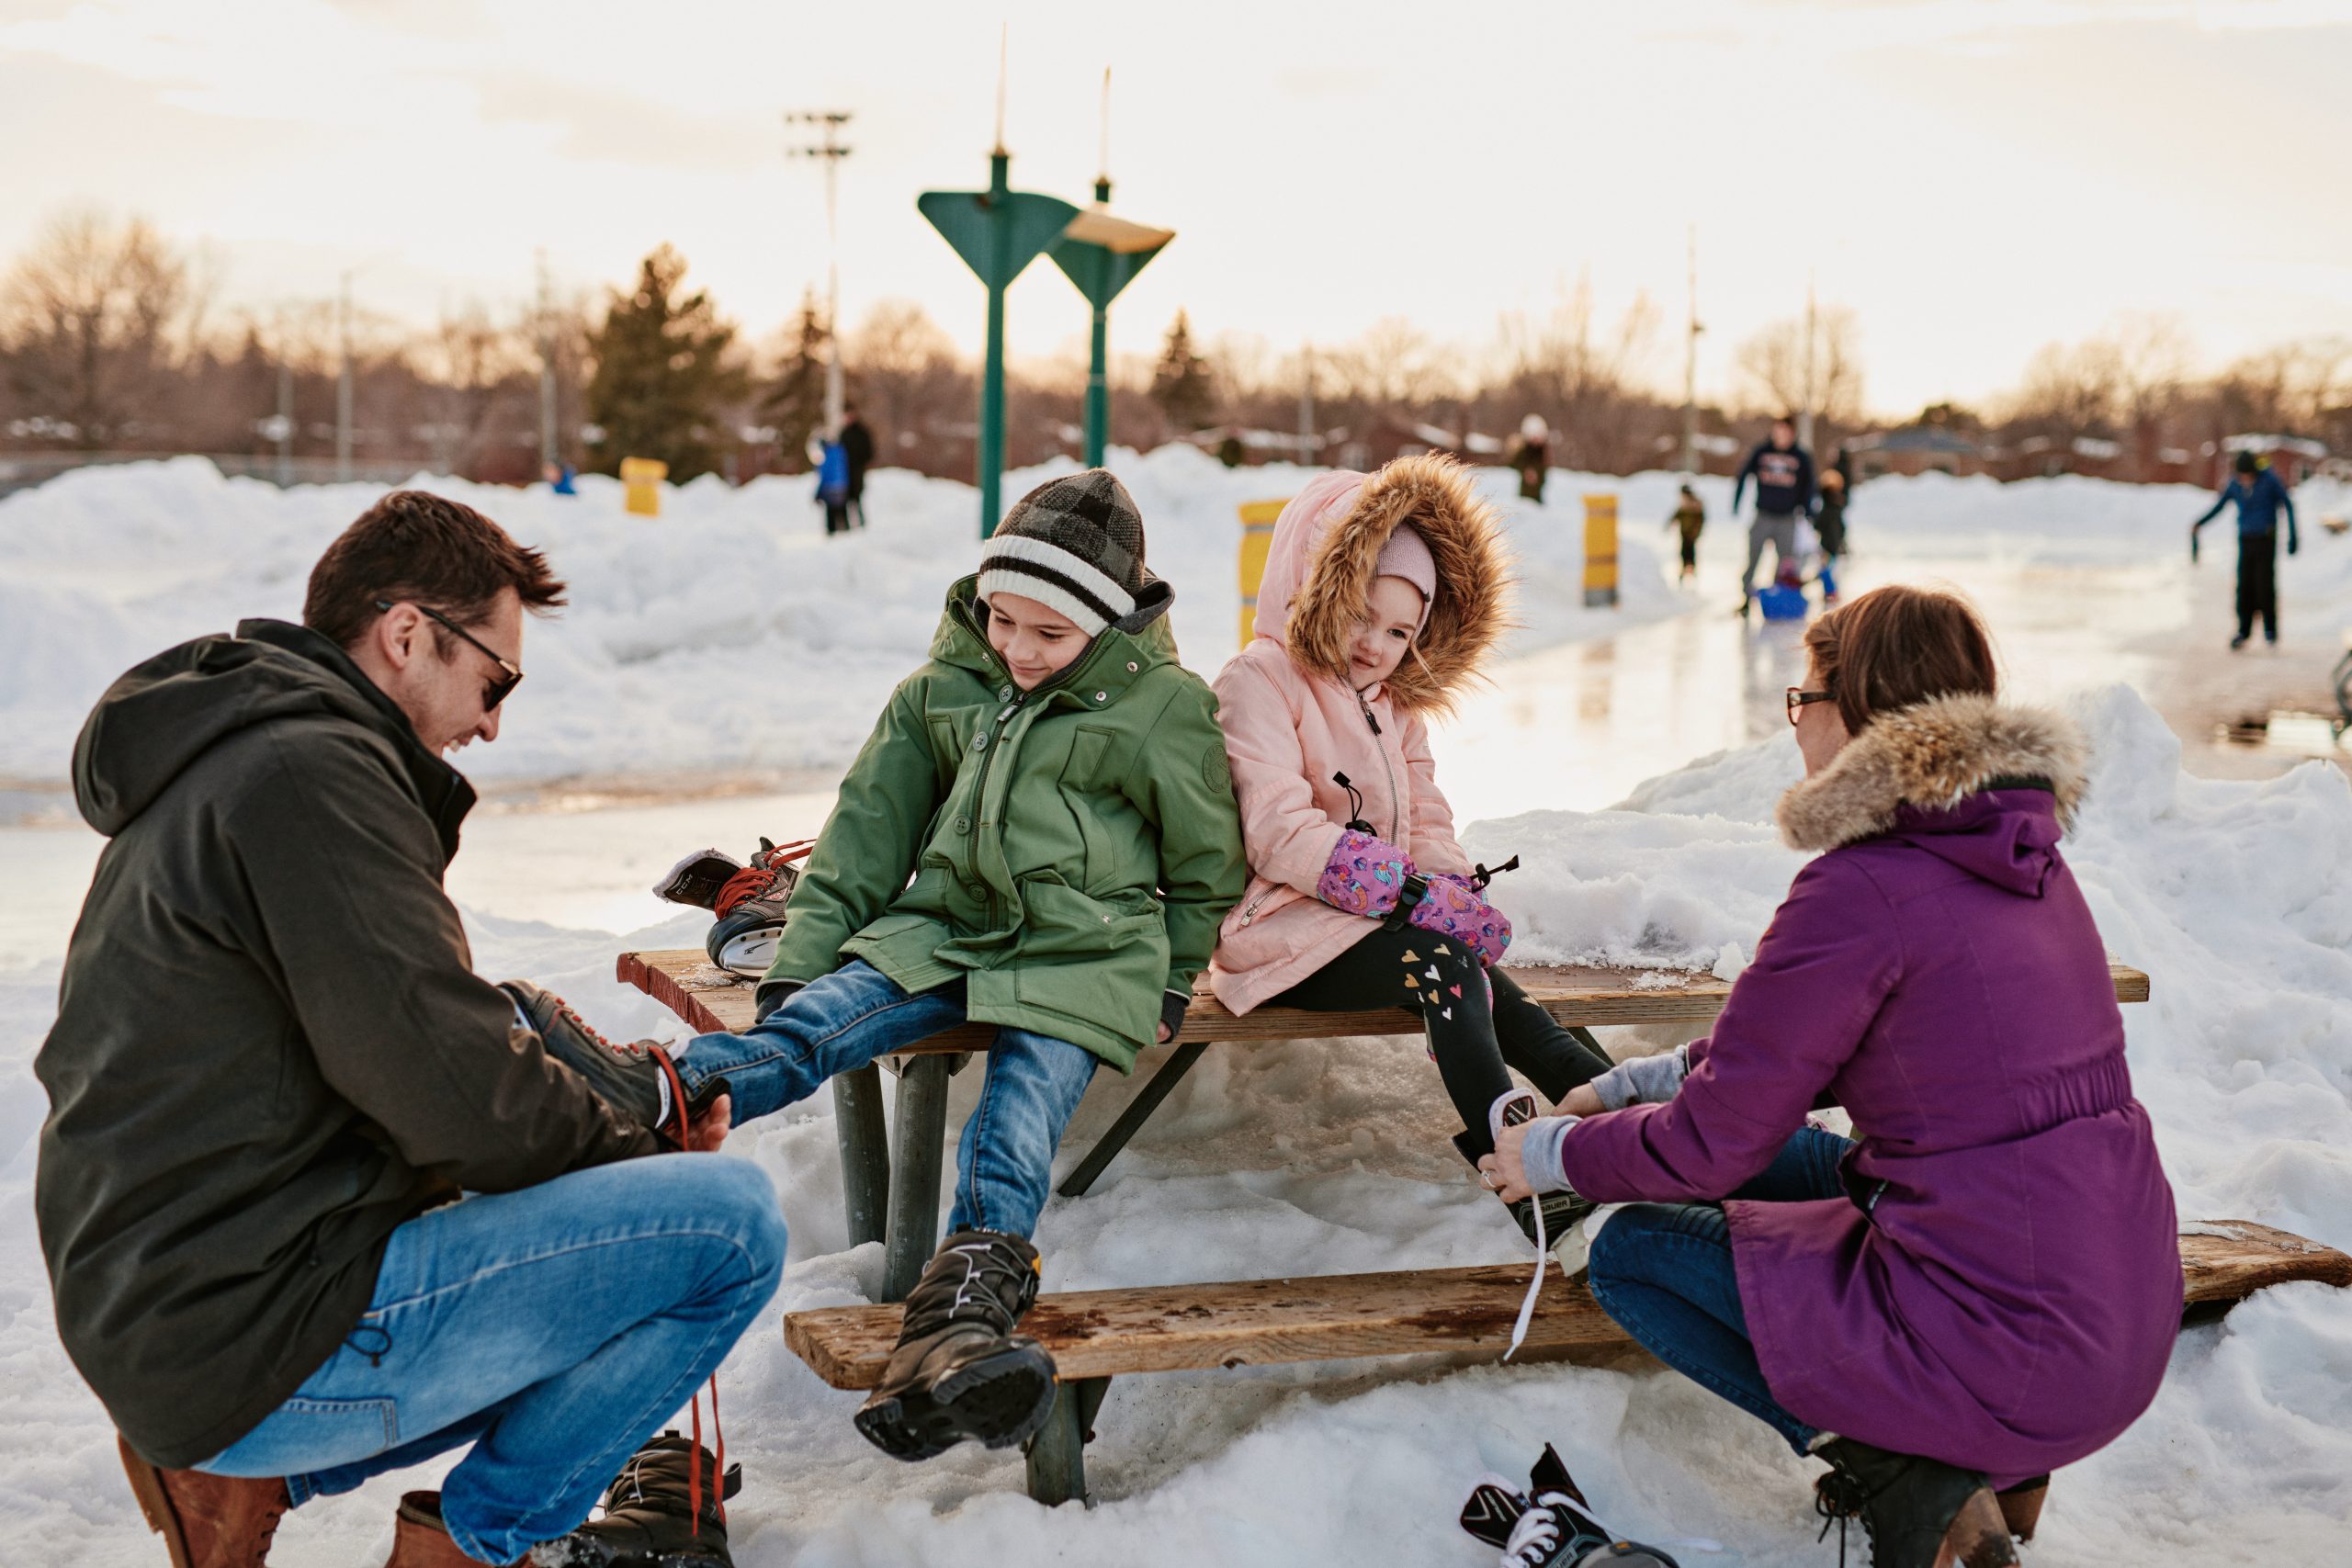 A family of four sitting on a snowy bench, with the parents putting skates on their children.